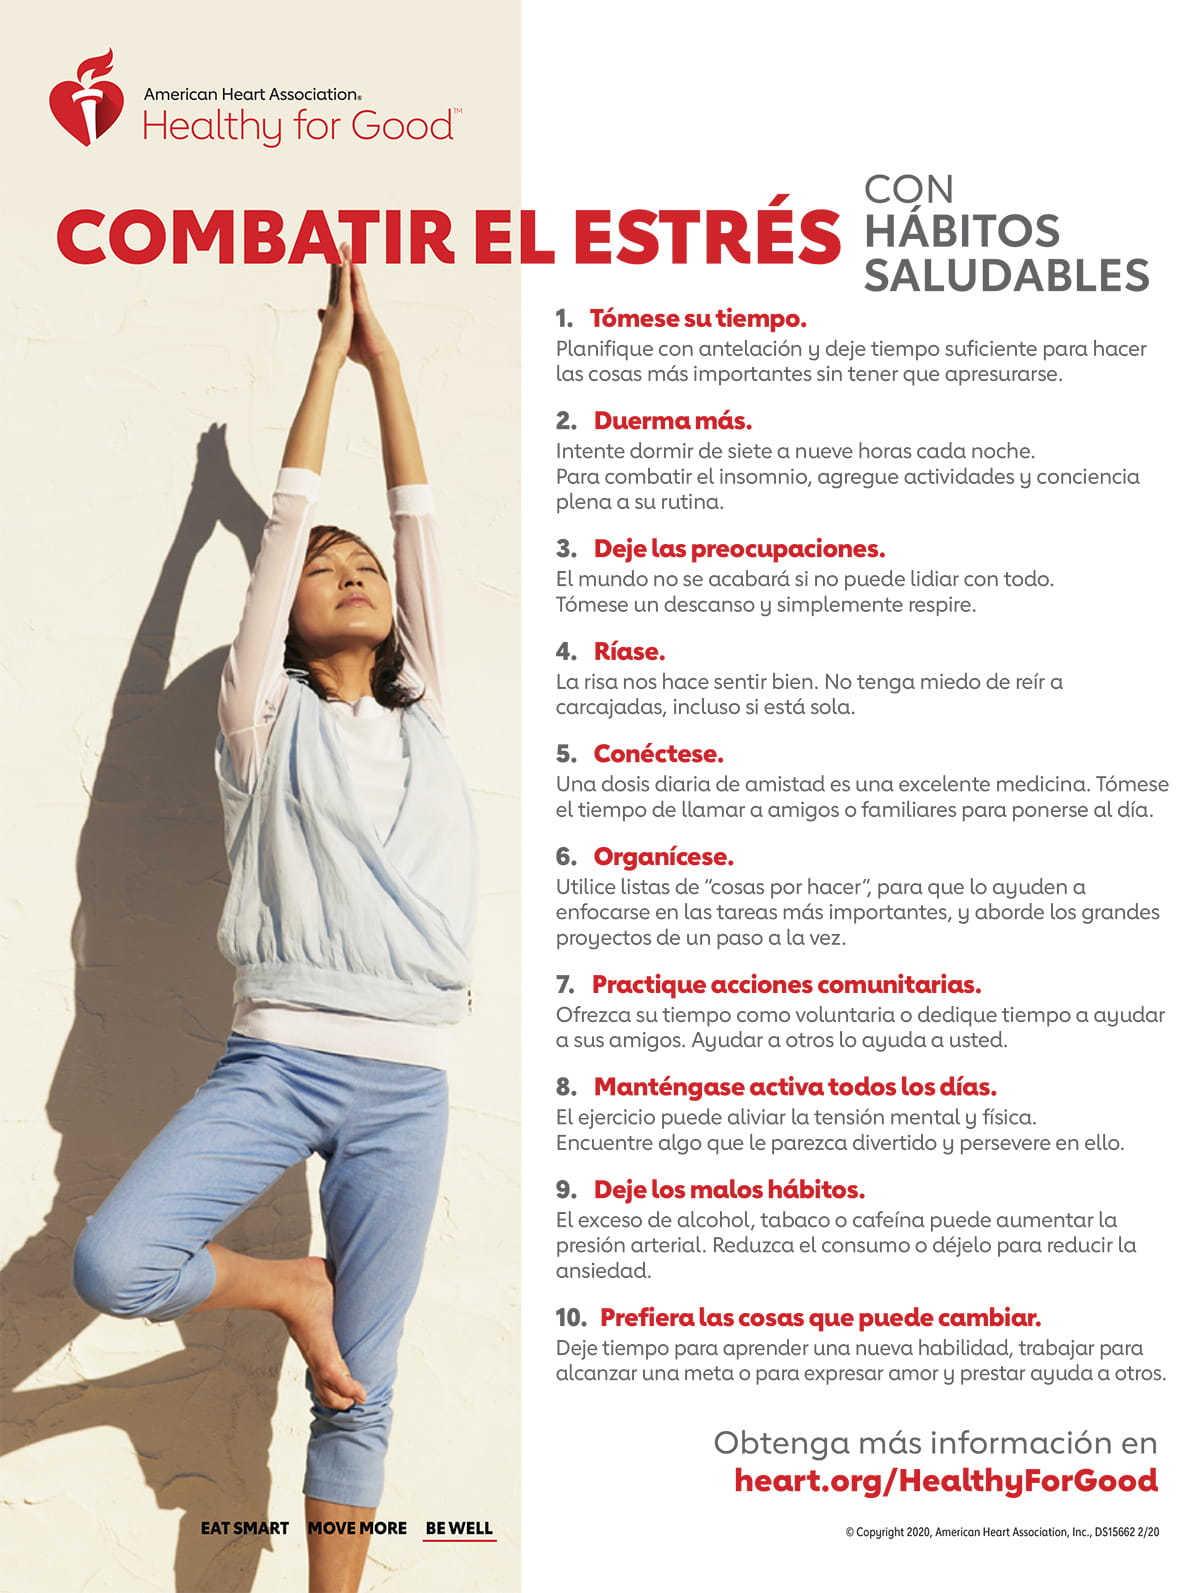 Fight stress with healthy habits infographic in Spanish